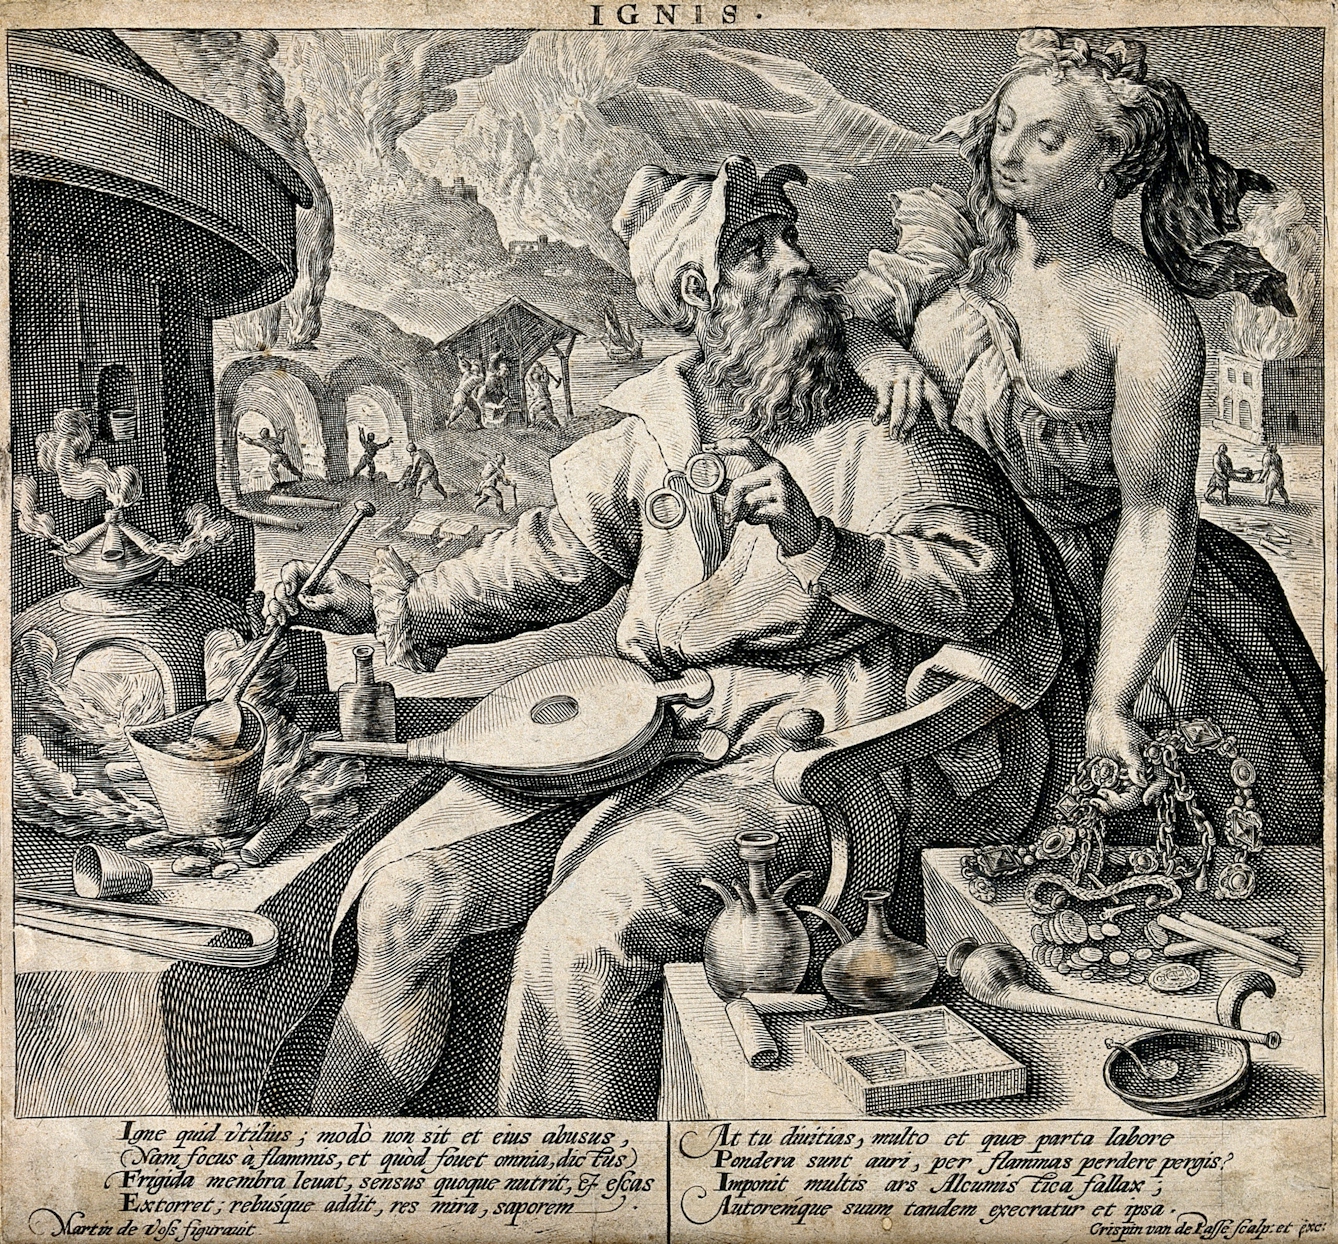 A 16th-century alchemist being warned of the dangers of alchemy by Prudentia